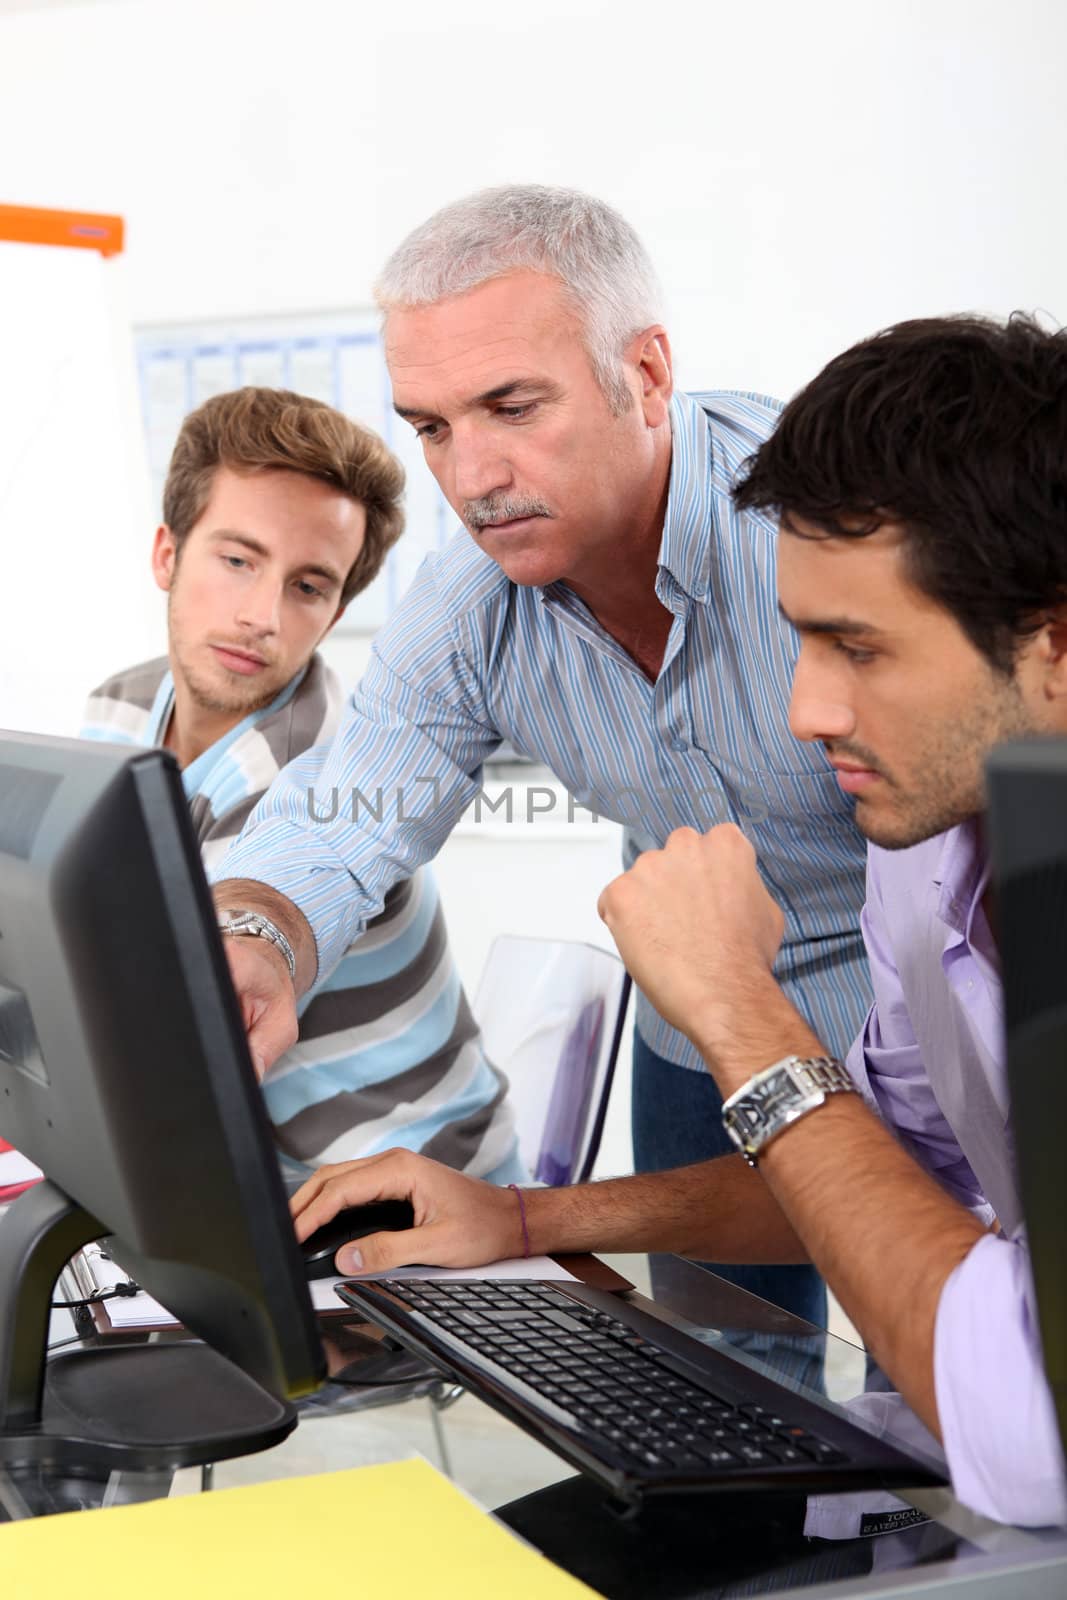 College lecturer showing students something on the computer by phovoir